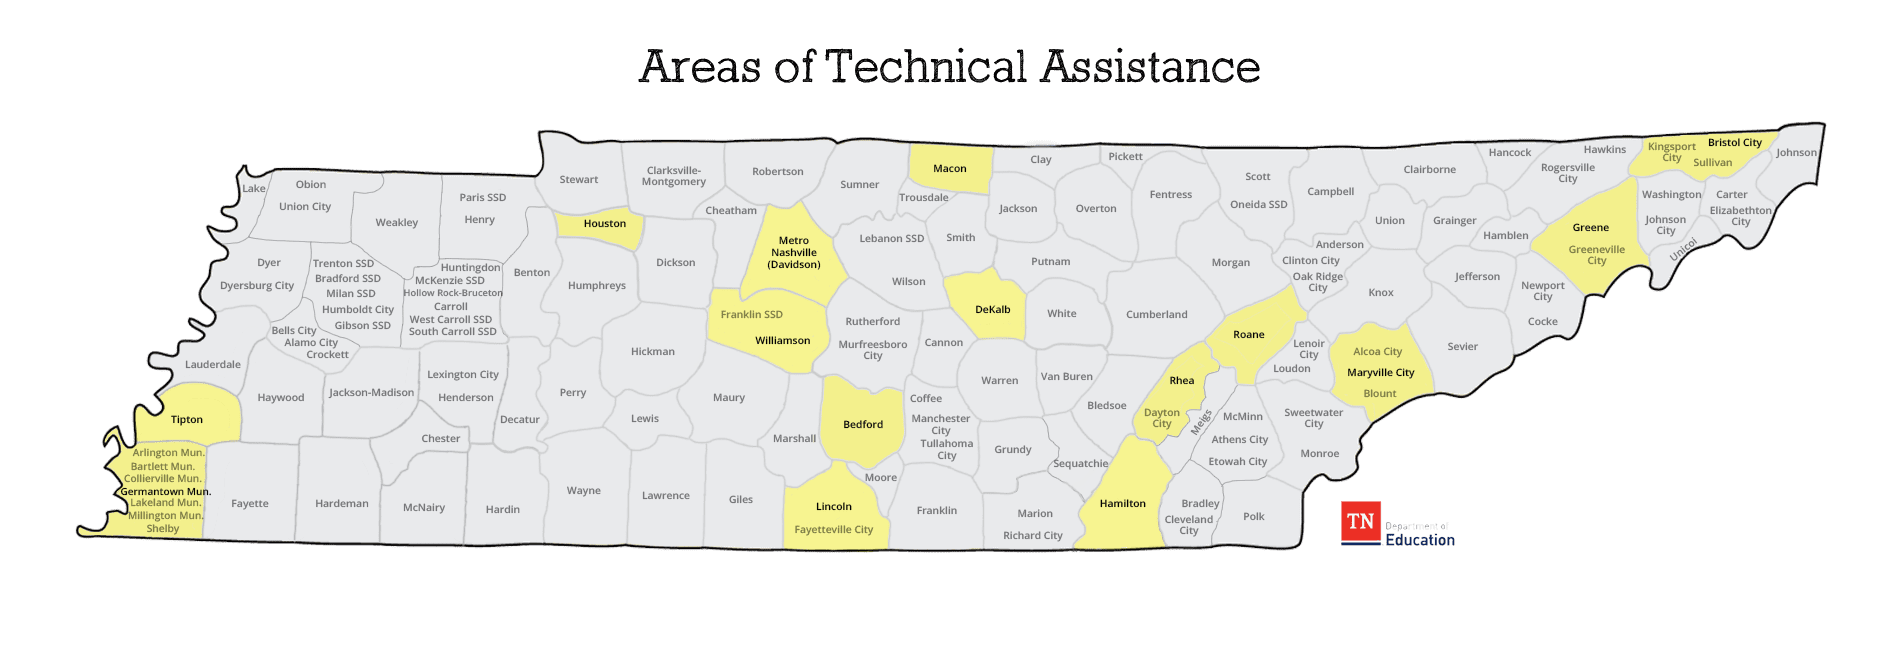 This Areas of Technical Assistance map shows which counties are recieving technical assistance services. Currently these counties are Germantown, Houston, Bedford, Macon, Sequatchie, Rhea, Roane, Maryville City, Greene, Sullivan, and Bristol City. 